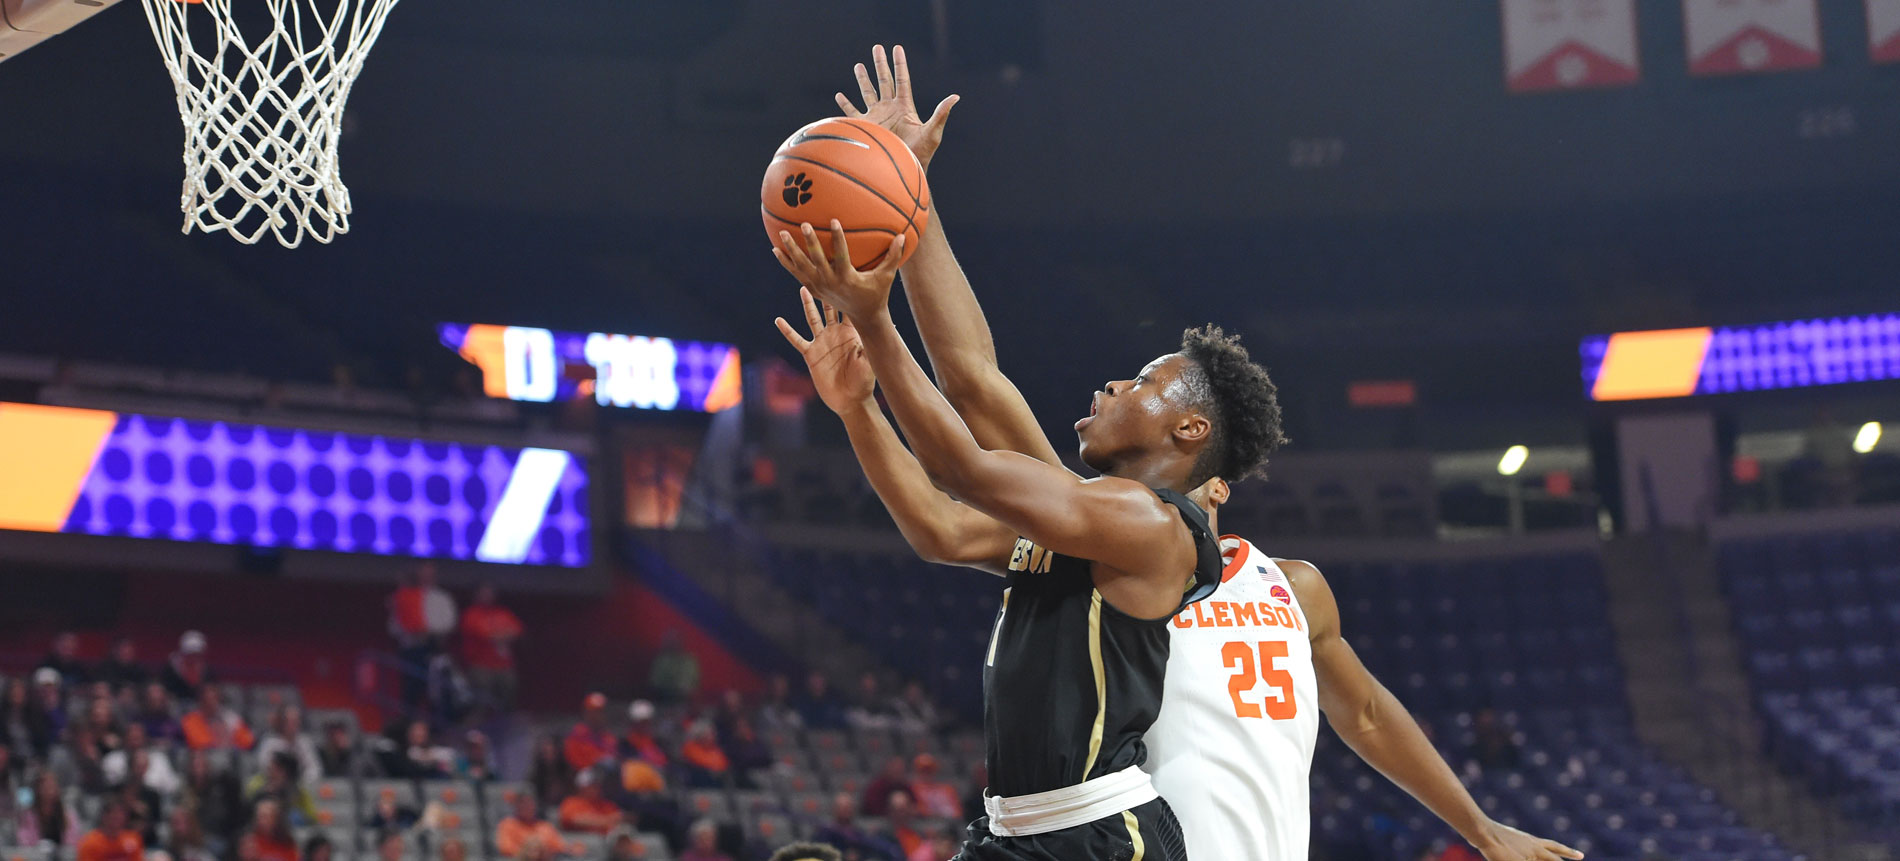 Trojans Fall in Exhibition Contest at Clemson